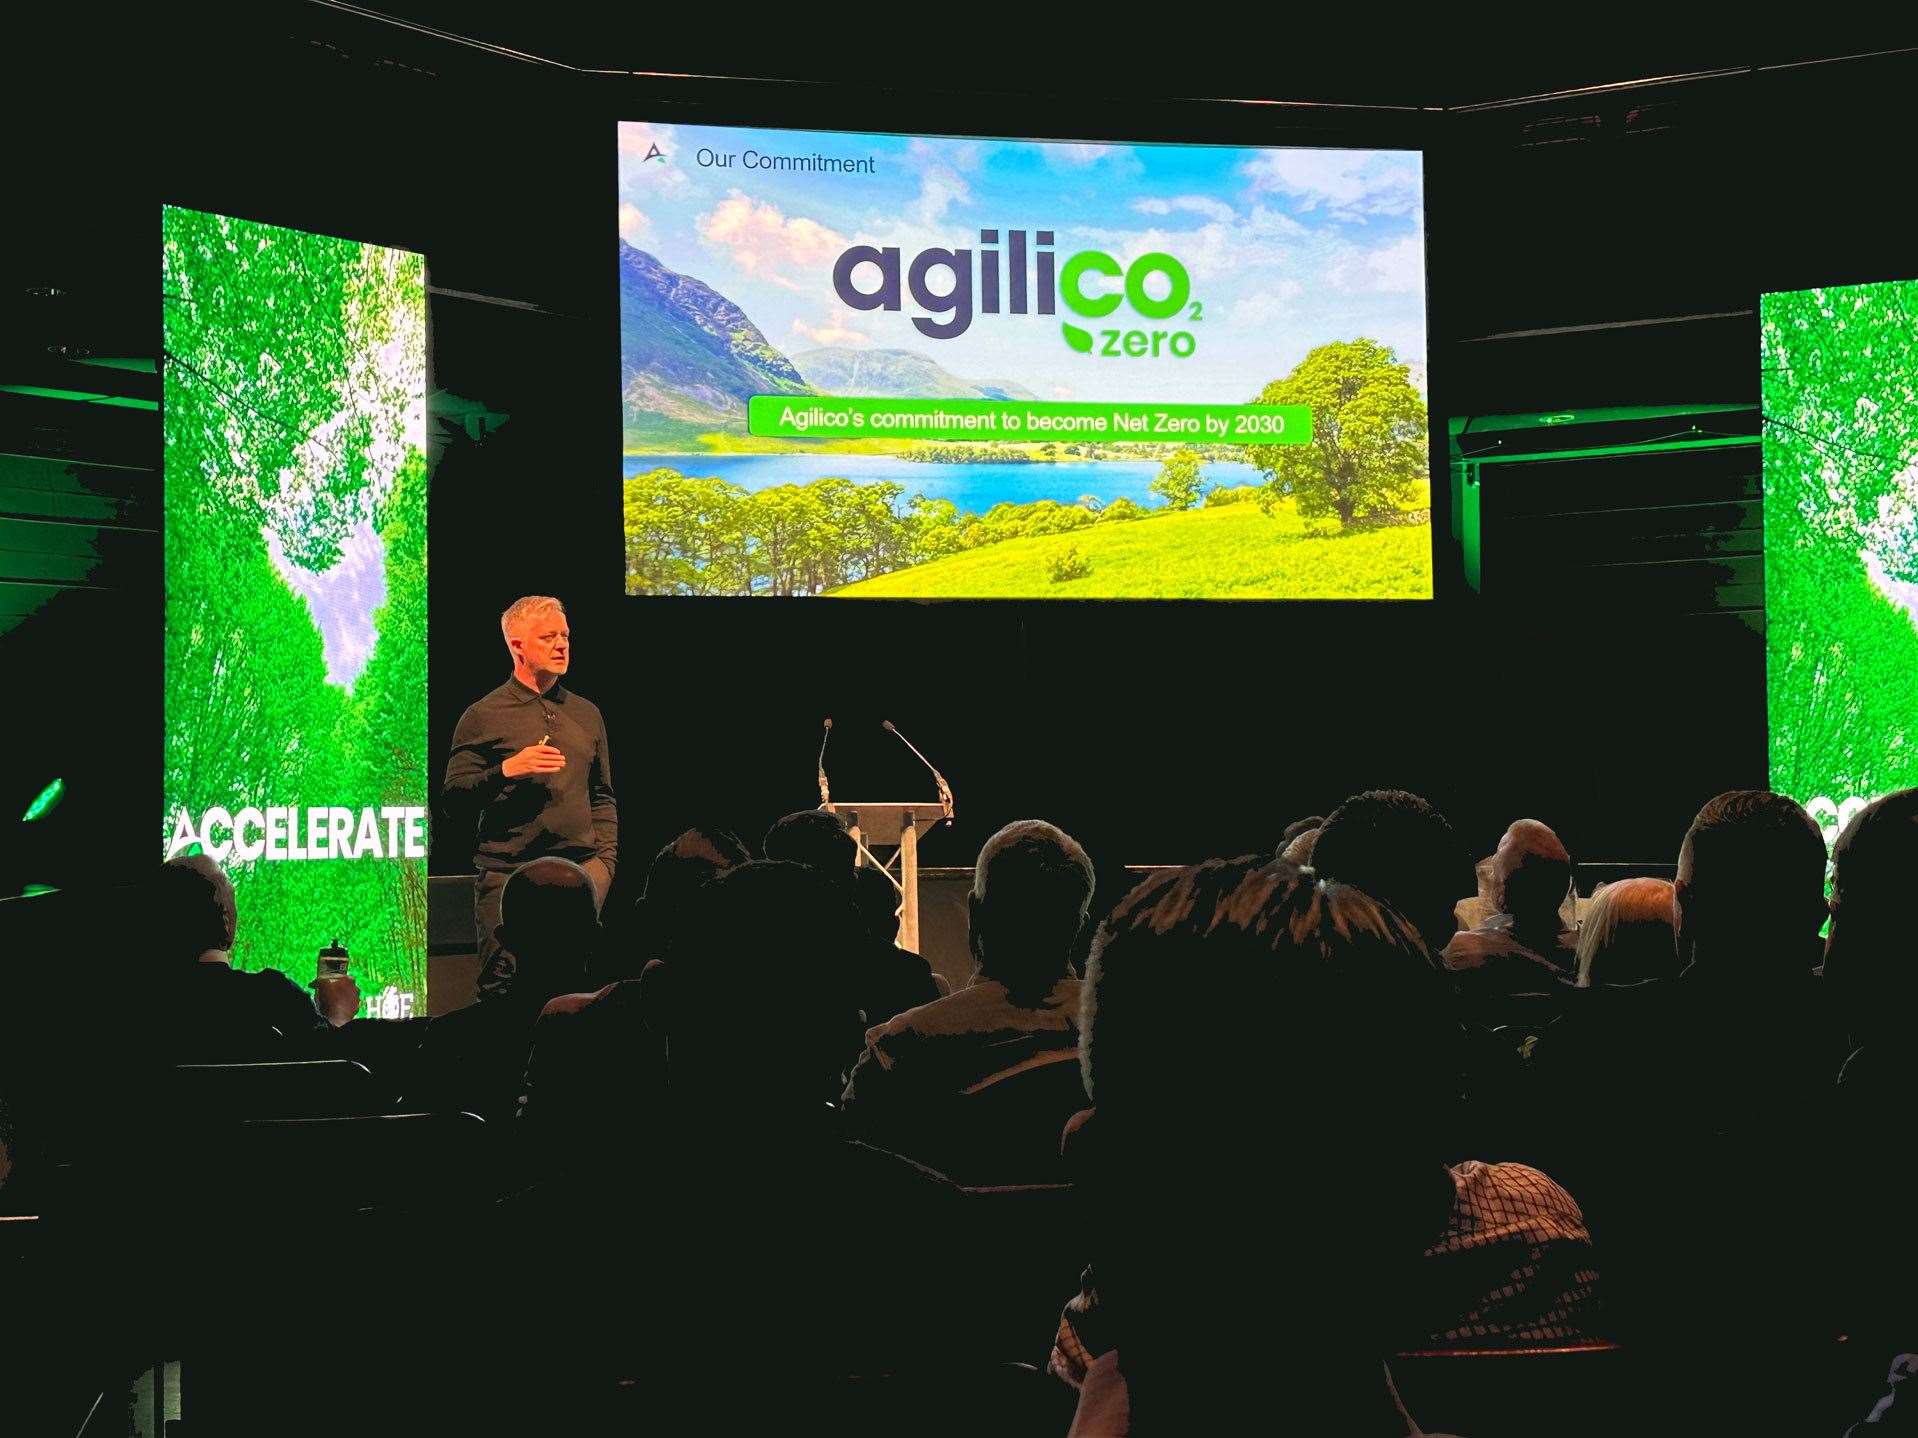 Agilico has set out its mission to reach net zero by 2030.